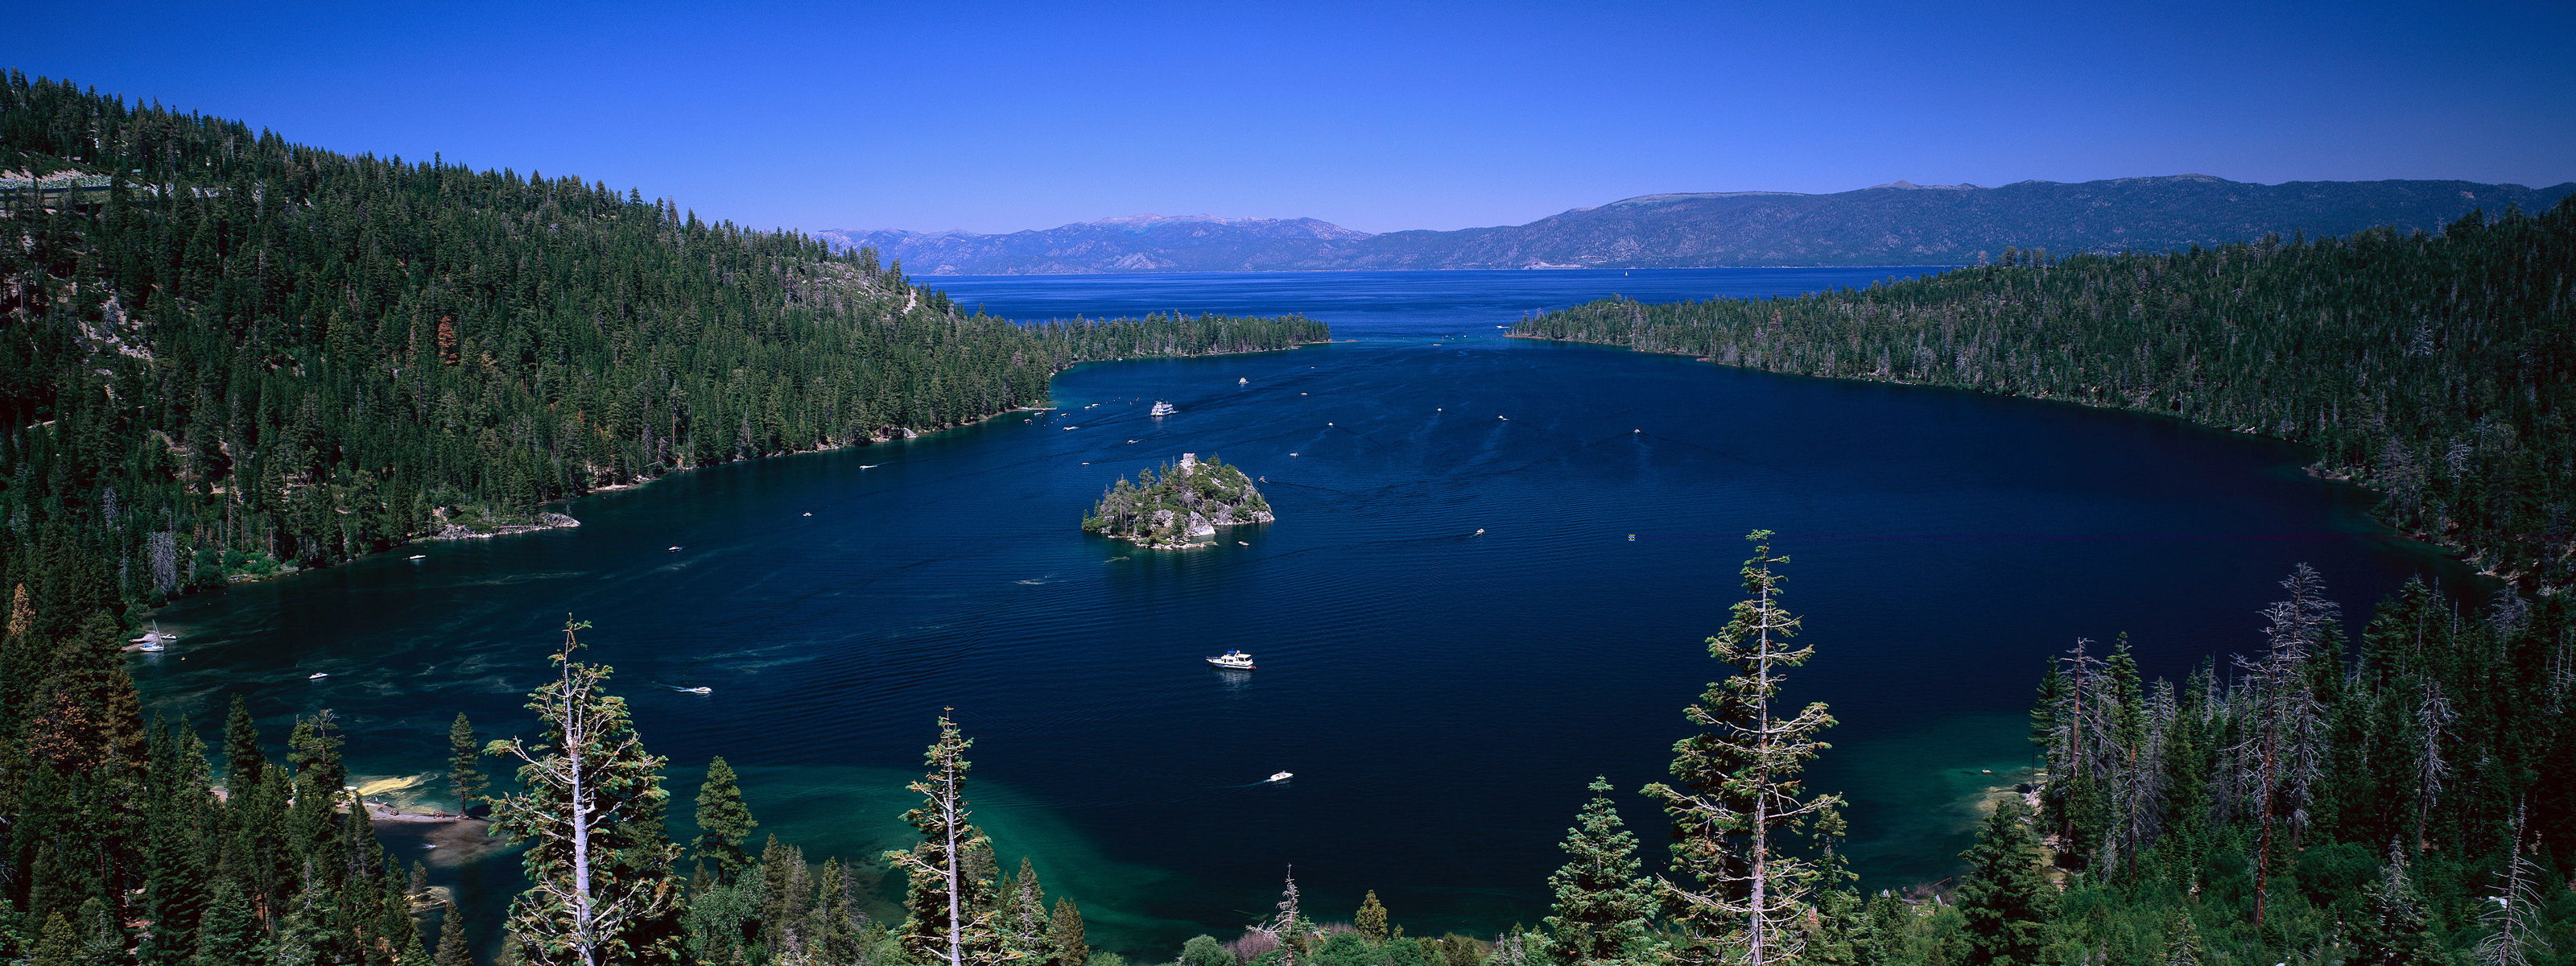 Mountains landscapes, Forest, Boats, Lake Tahoe, 3200x1200 Dual Screen Desktop